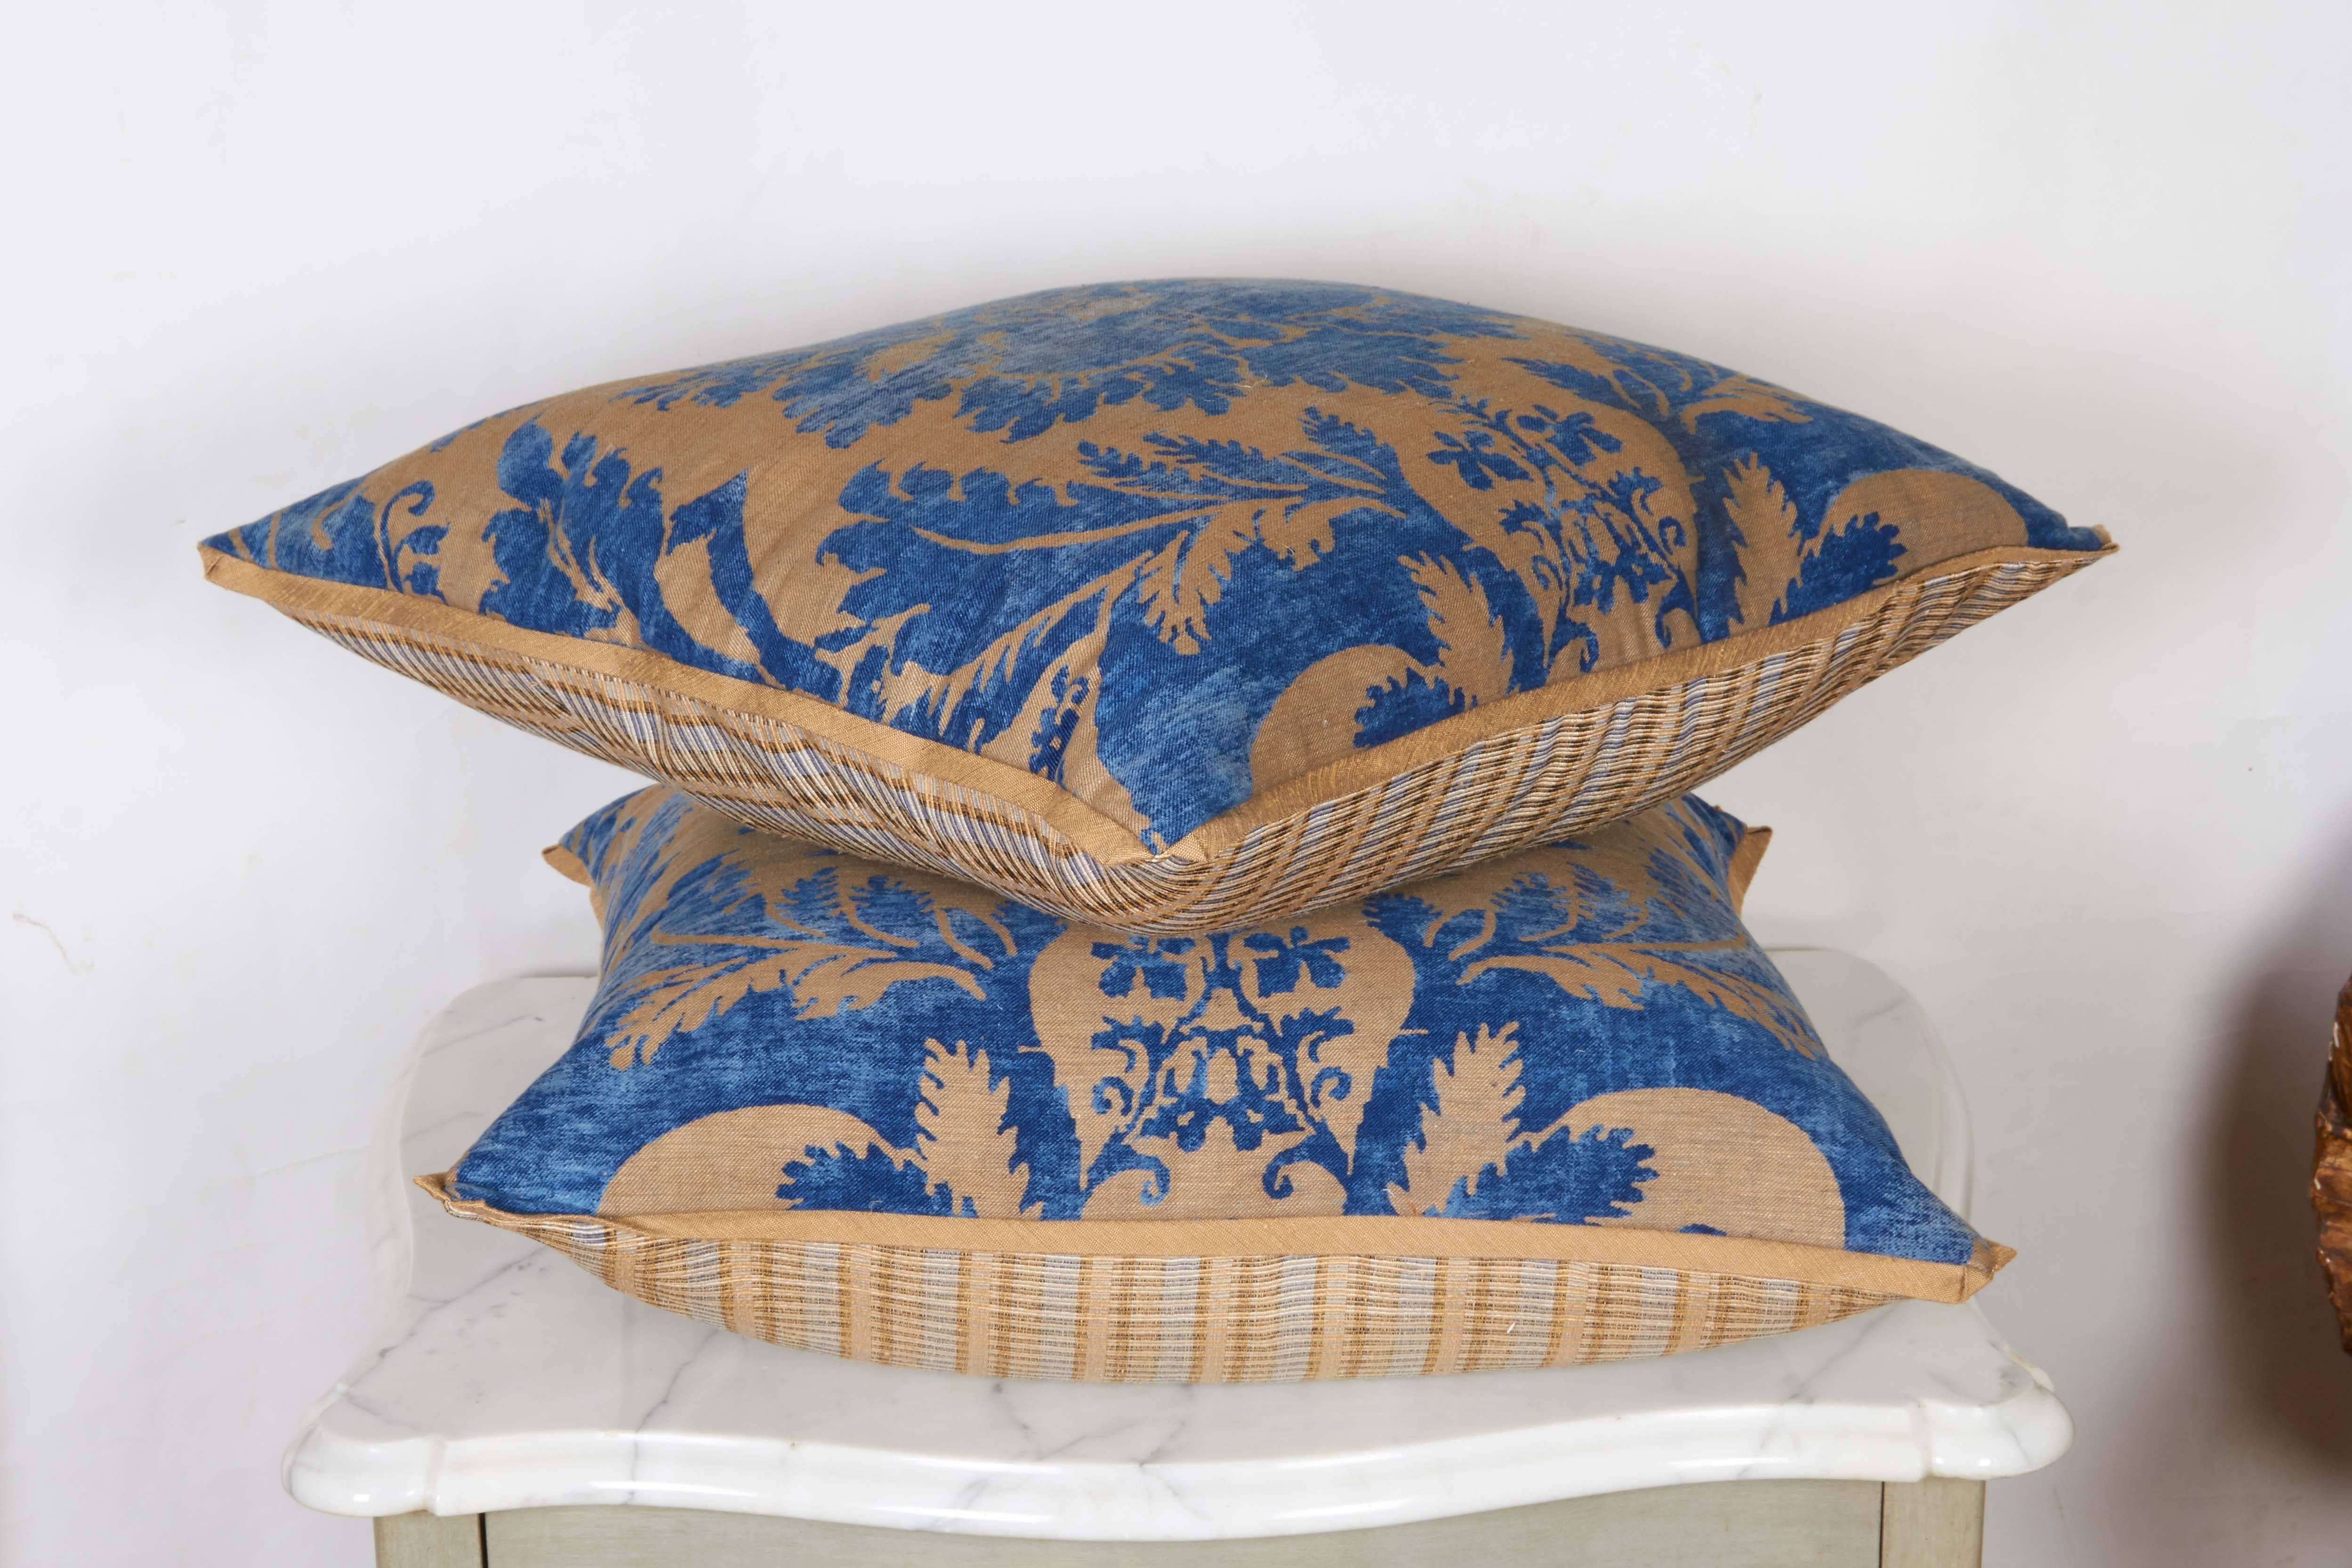 A pair of Fortuny fabric cushions in the Glicine pattern, indigo and sand color way with silk blend backing material and silk bias edging, the pattern, a 17th century Italian design with wisteria motif. Newly made using vintage Fortuny fabric, circa